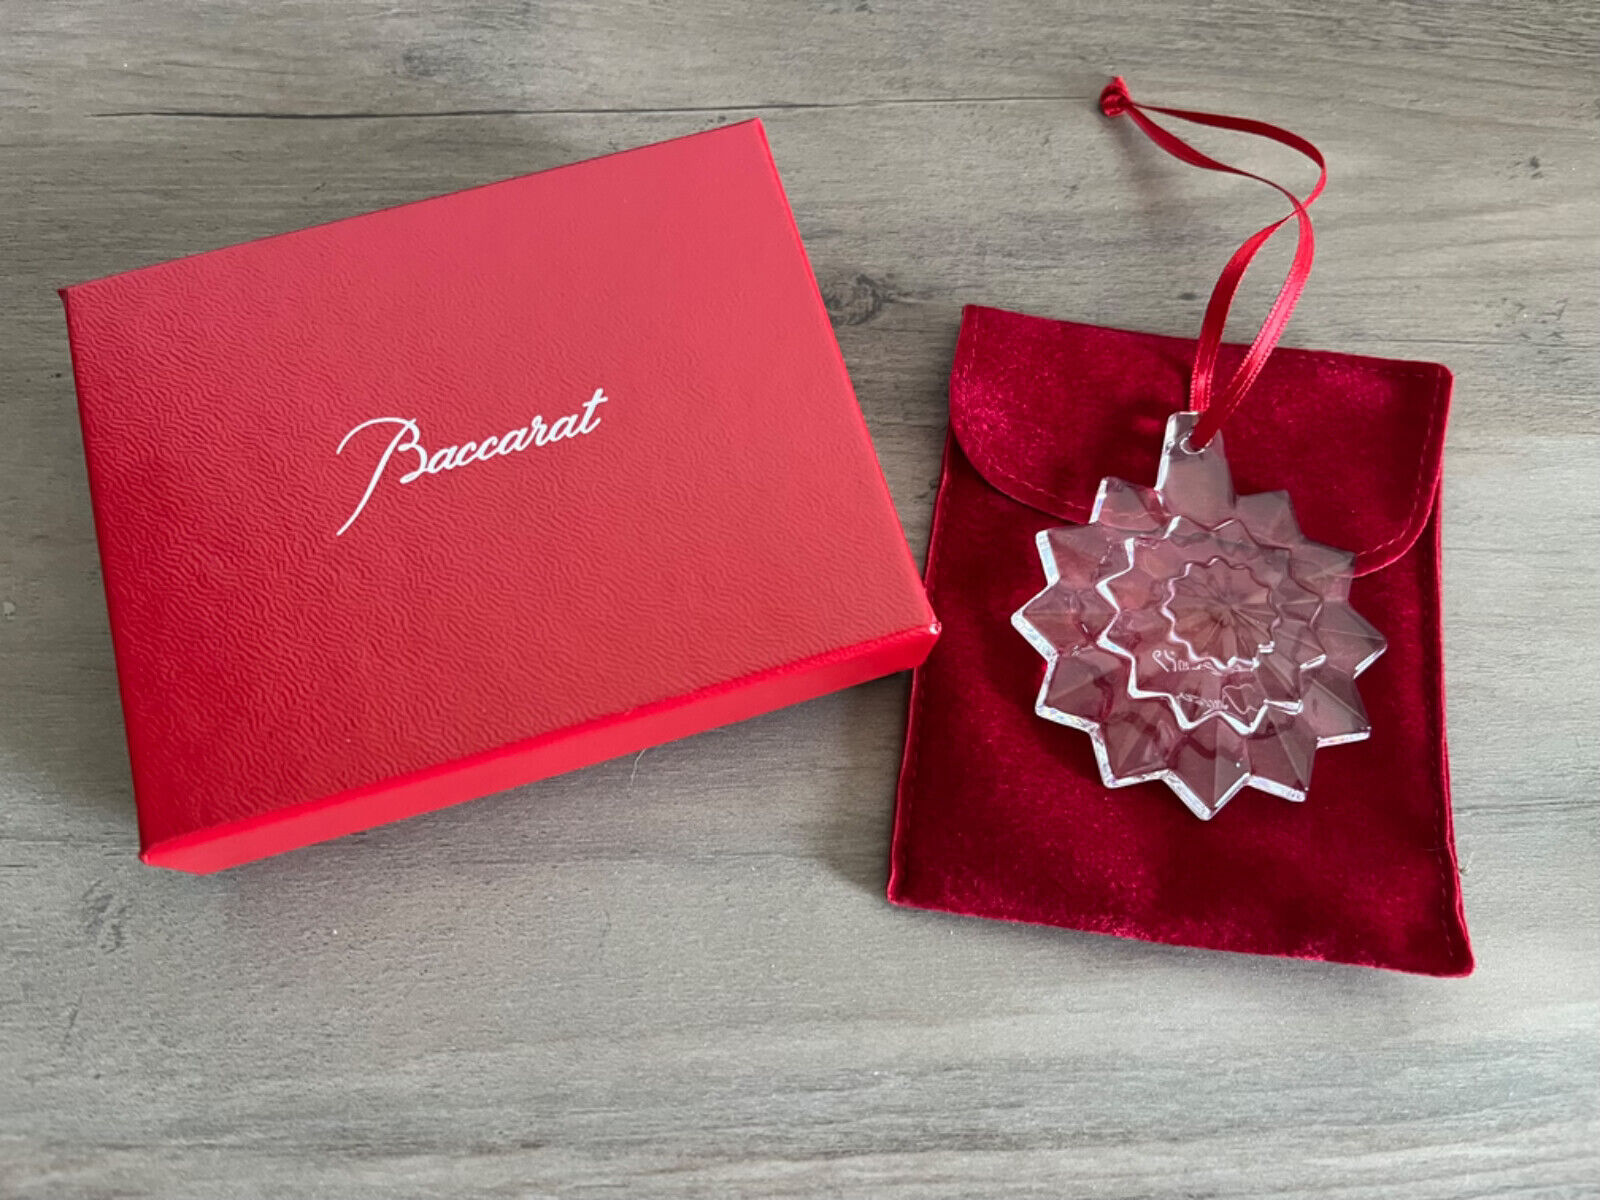 2019 Baccarat Annual Christmas Ornament #2813066; clear crystal